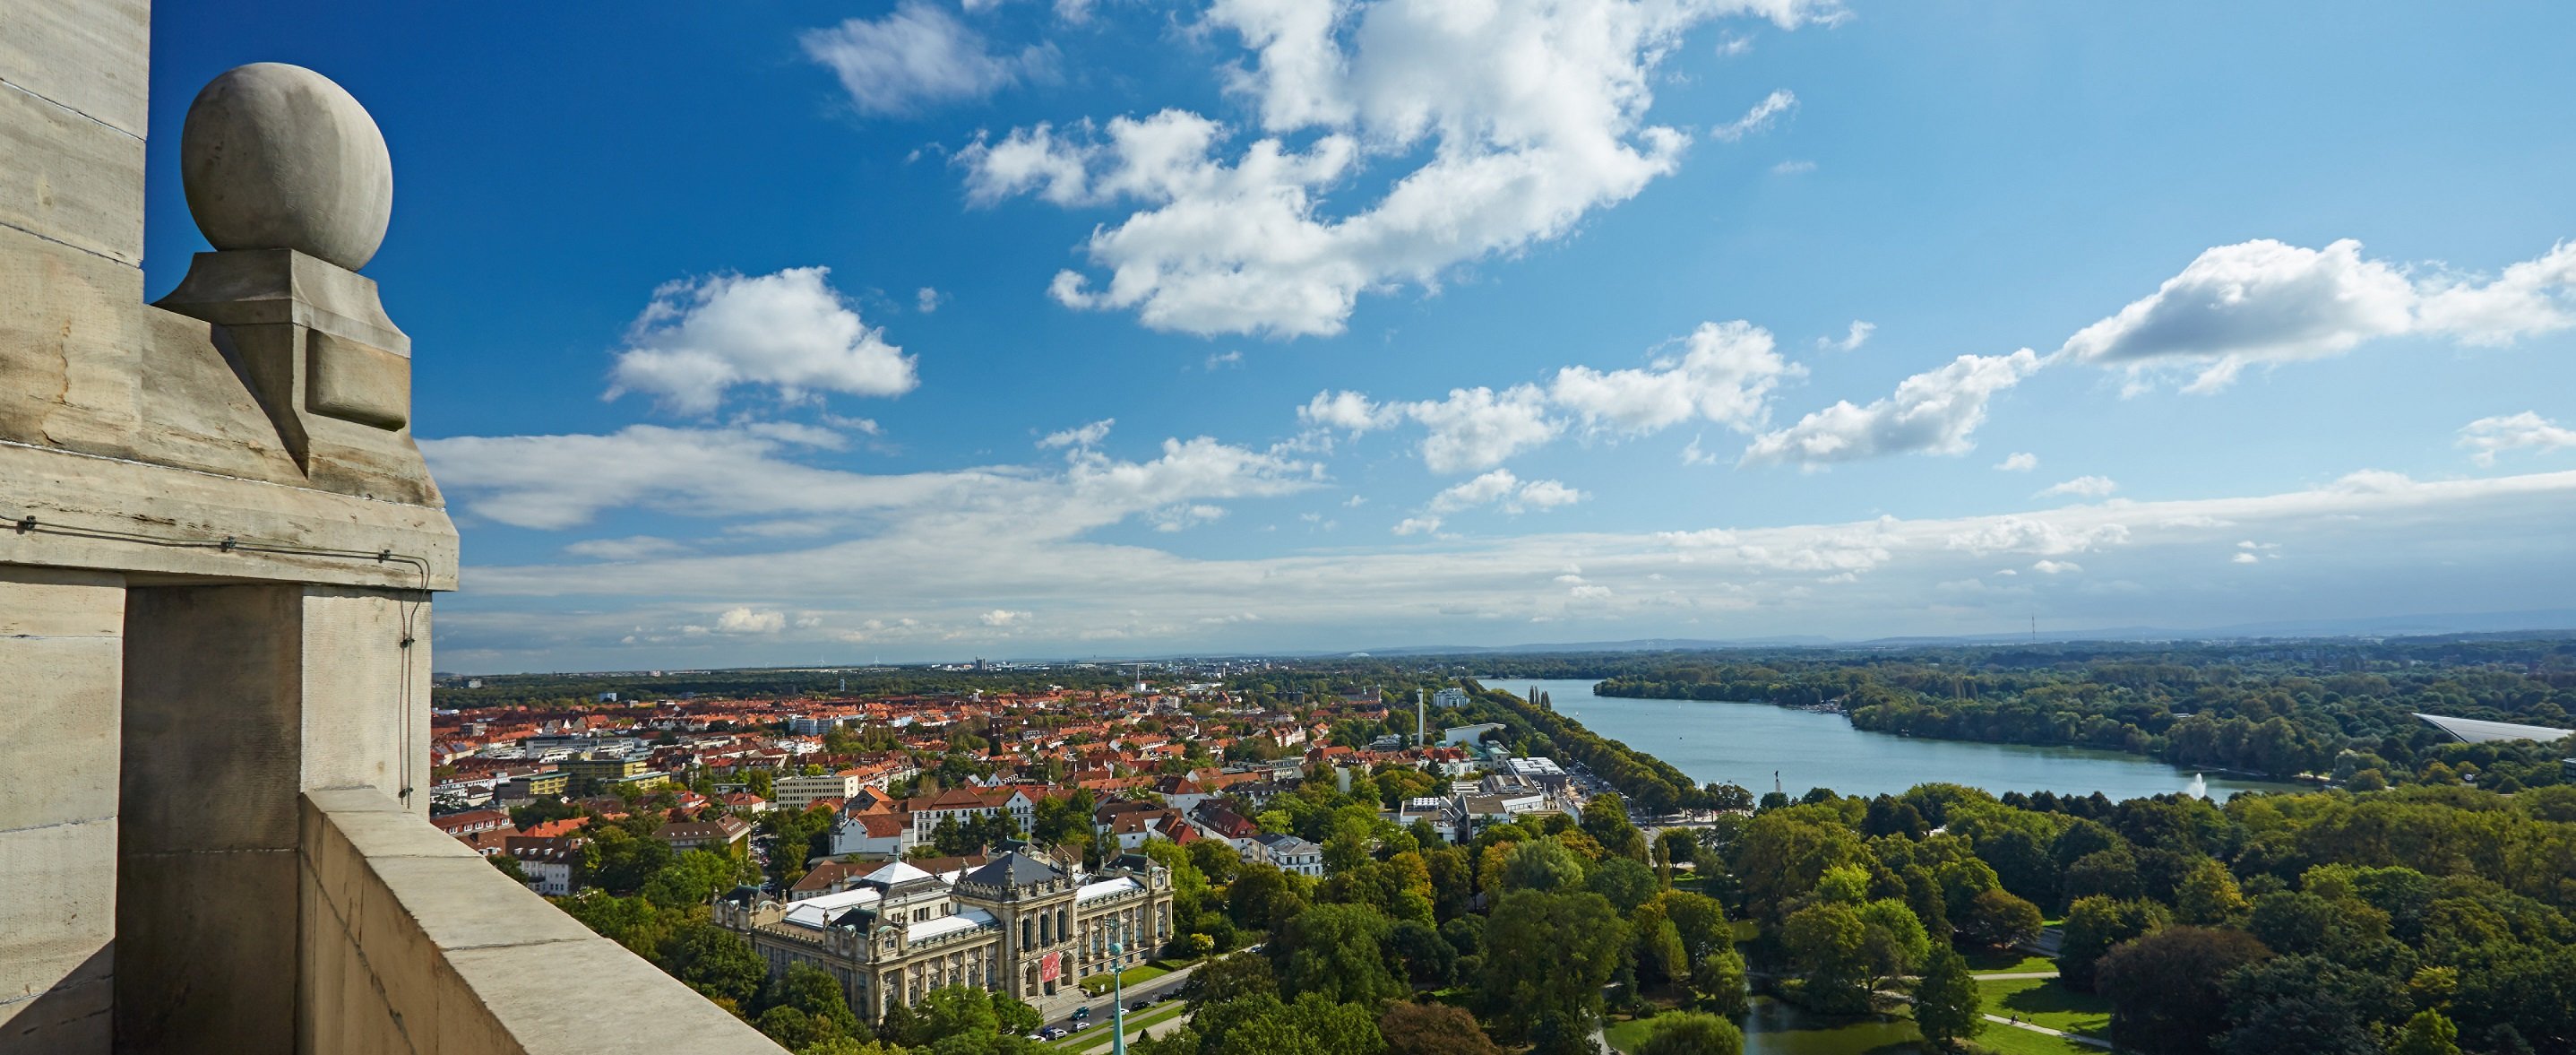 View from Hanover’s town hall on top of the southern city and the Maschsee.